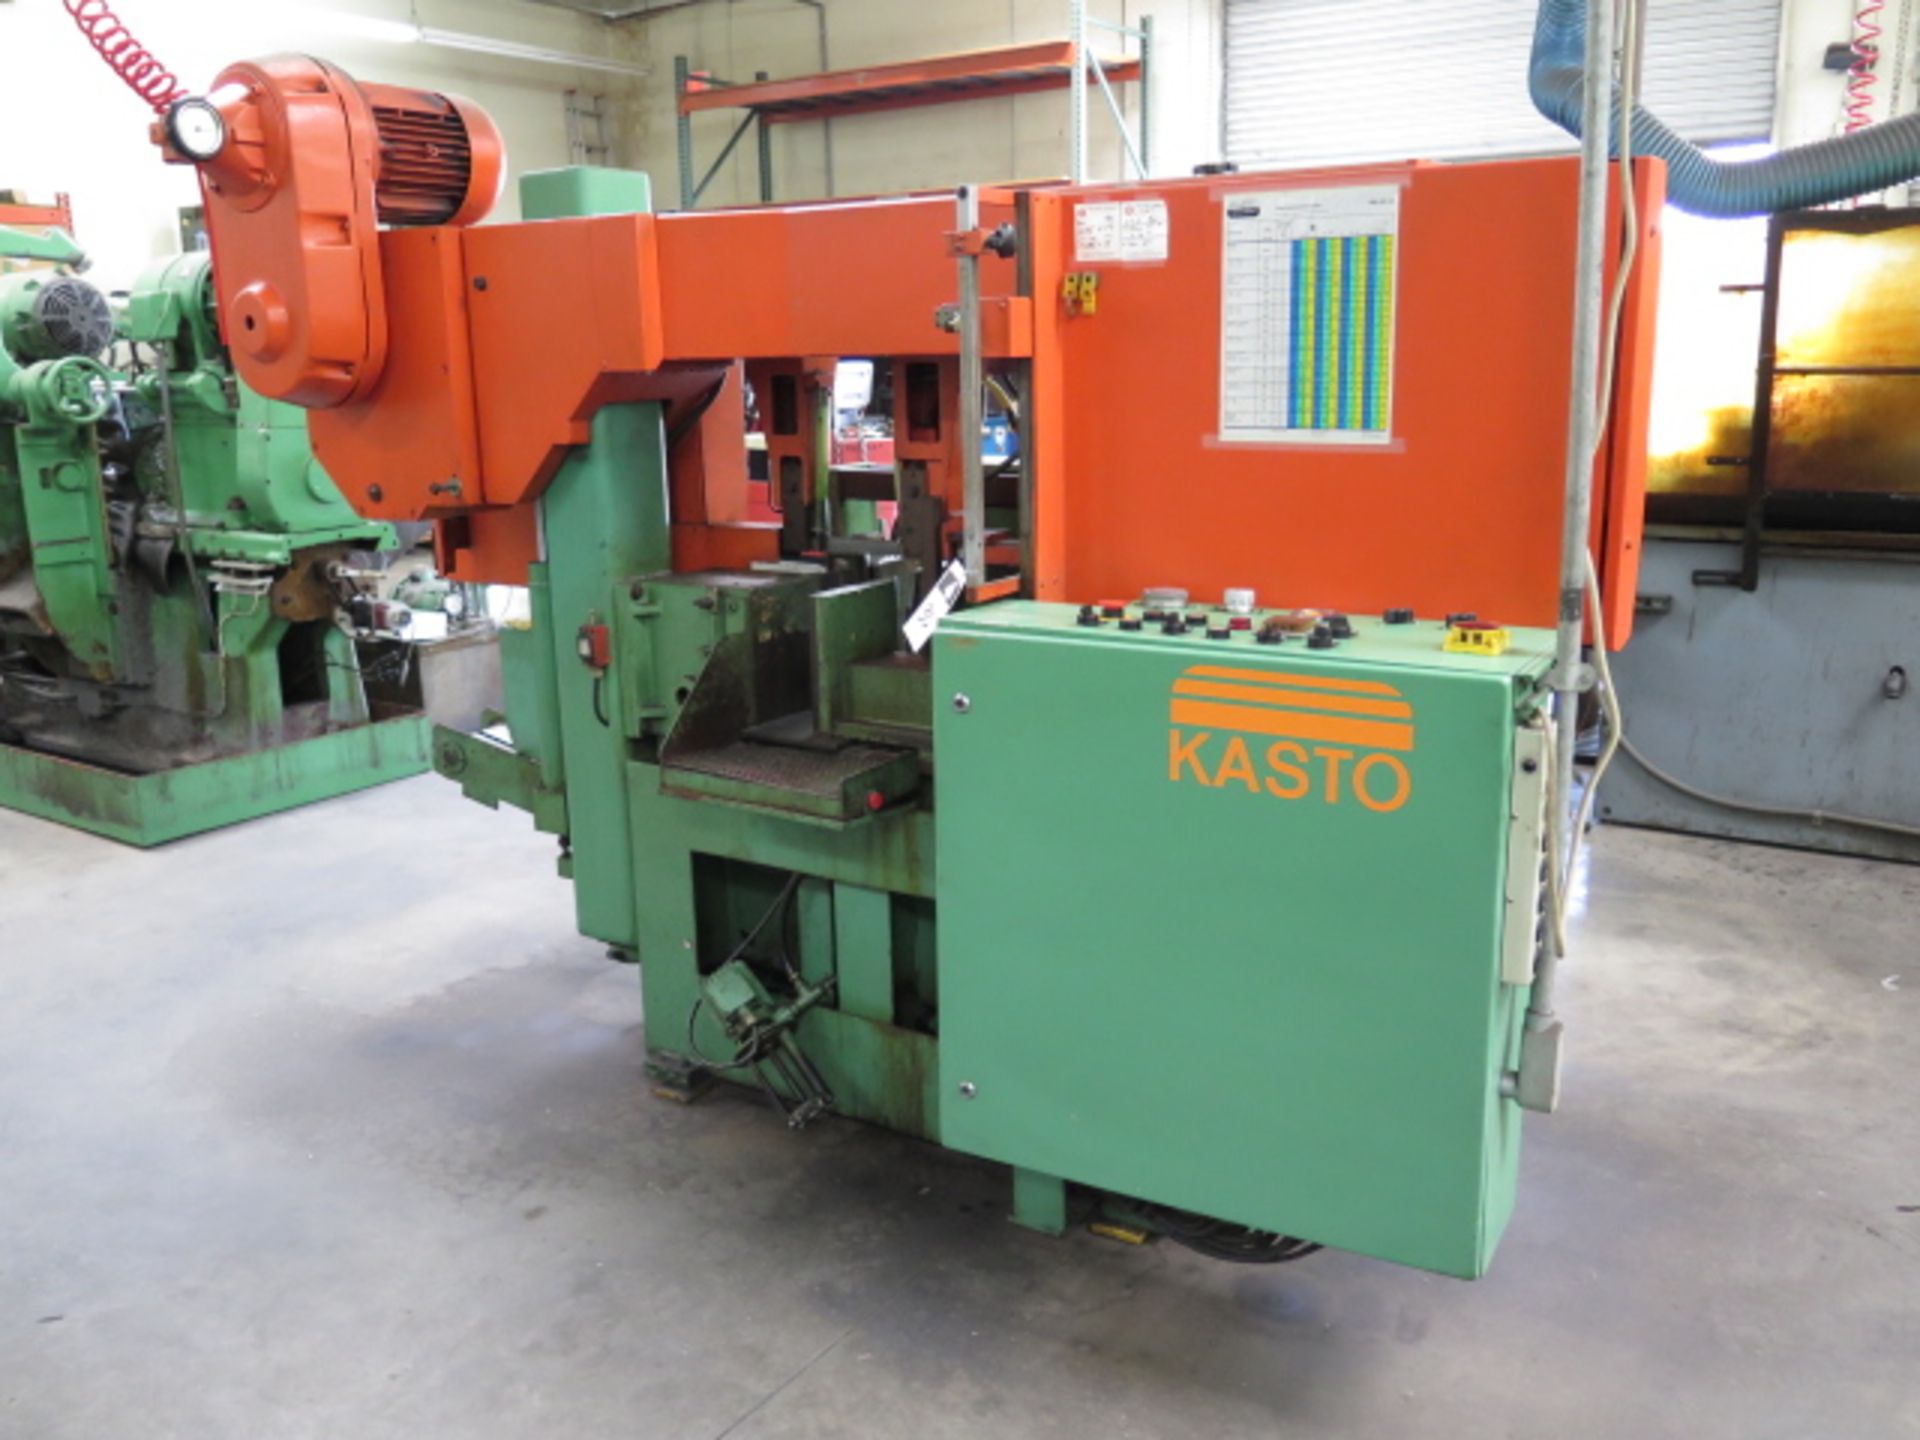 Kasto HBA360AU 15” Automatic Hydraulic Horizontal Band Saw w/ Hydraulic Clamping and Feeds, Chip - Image 2 of 5